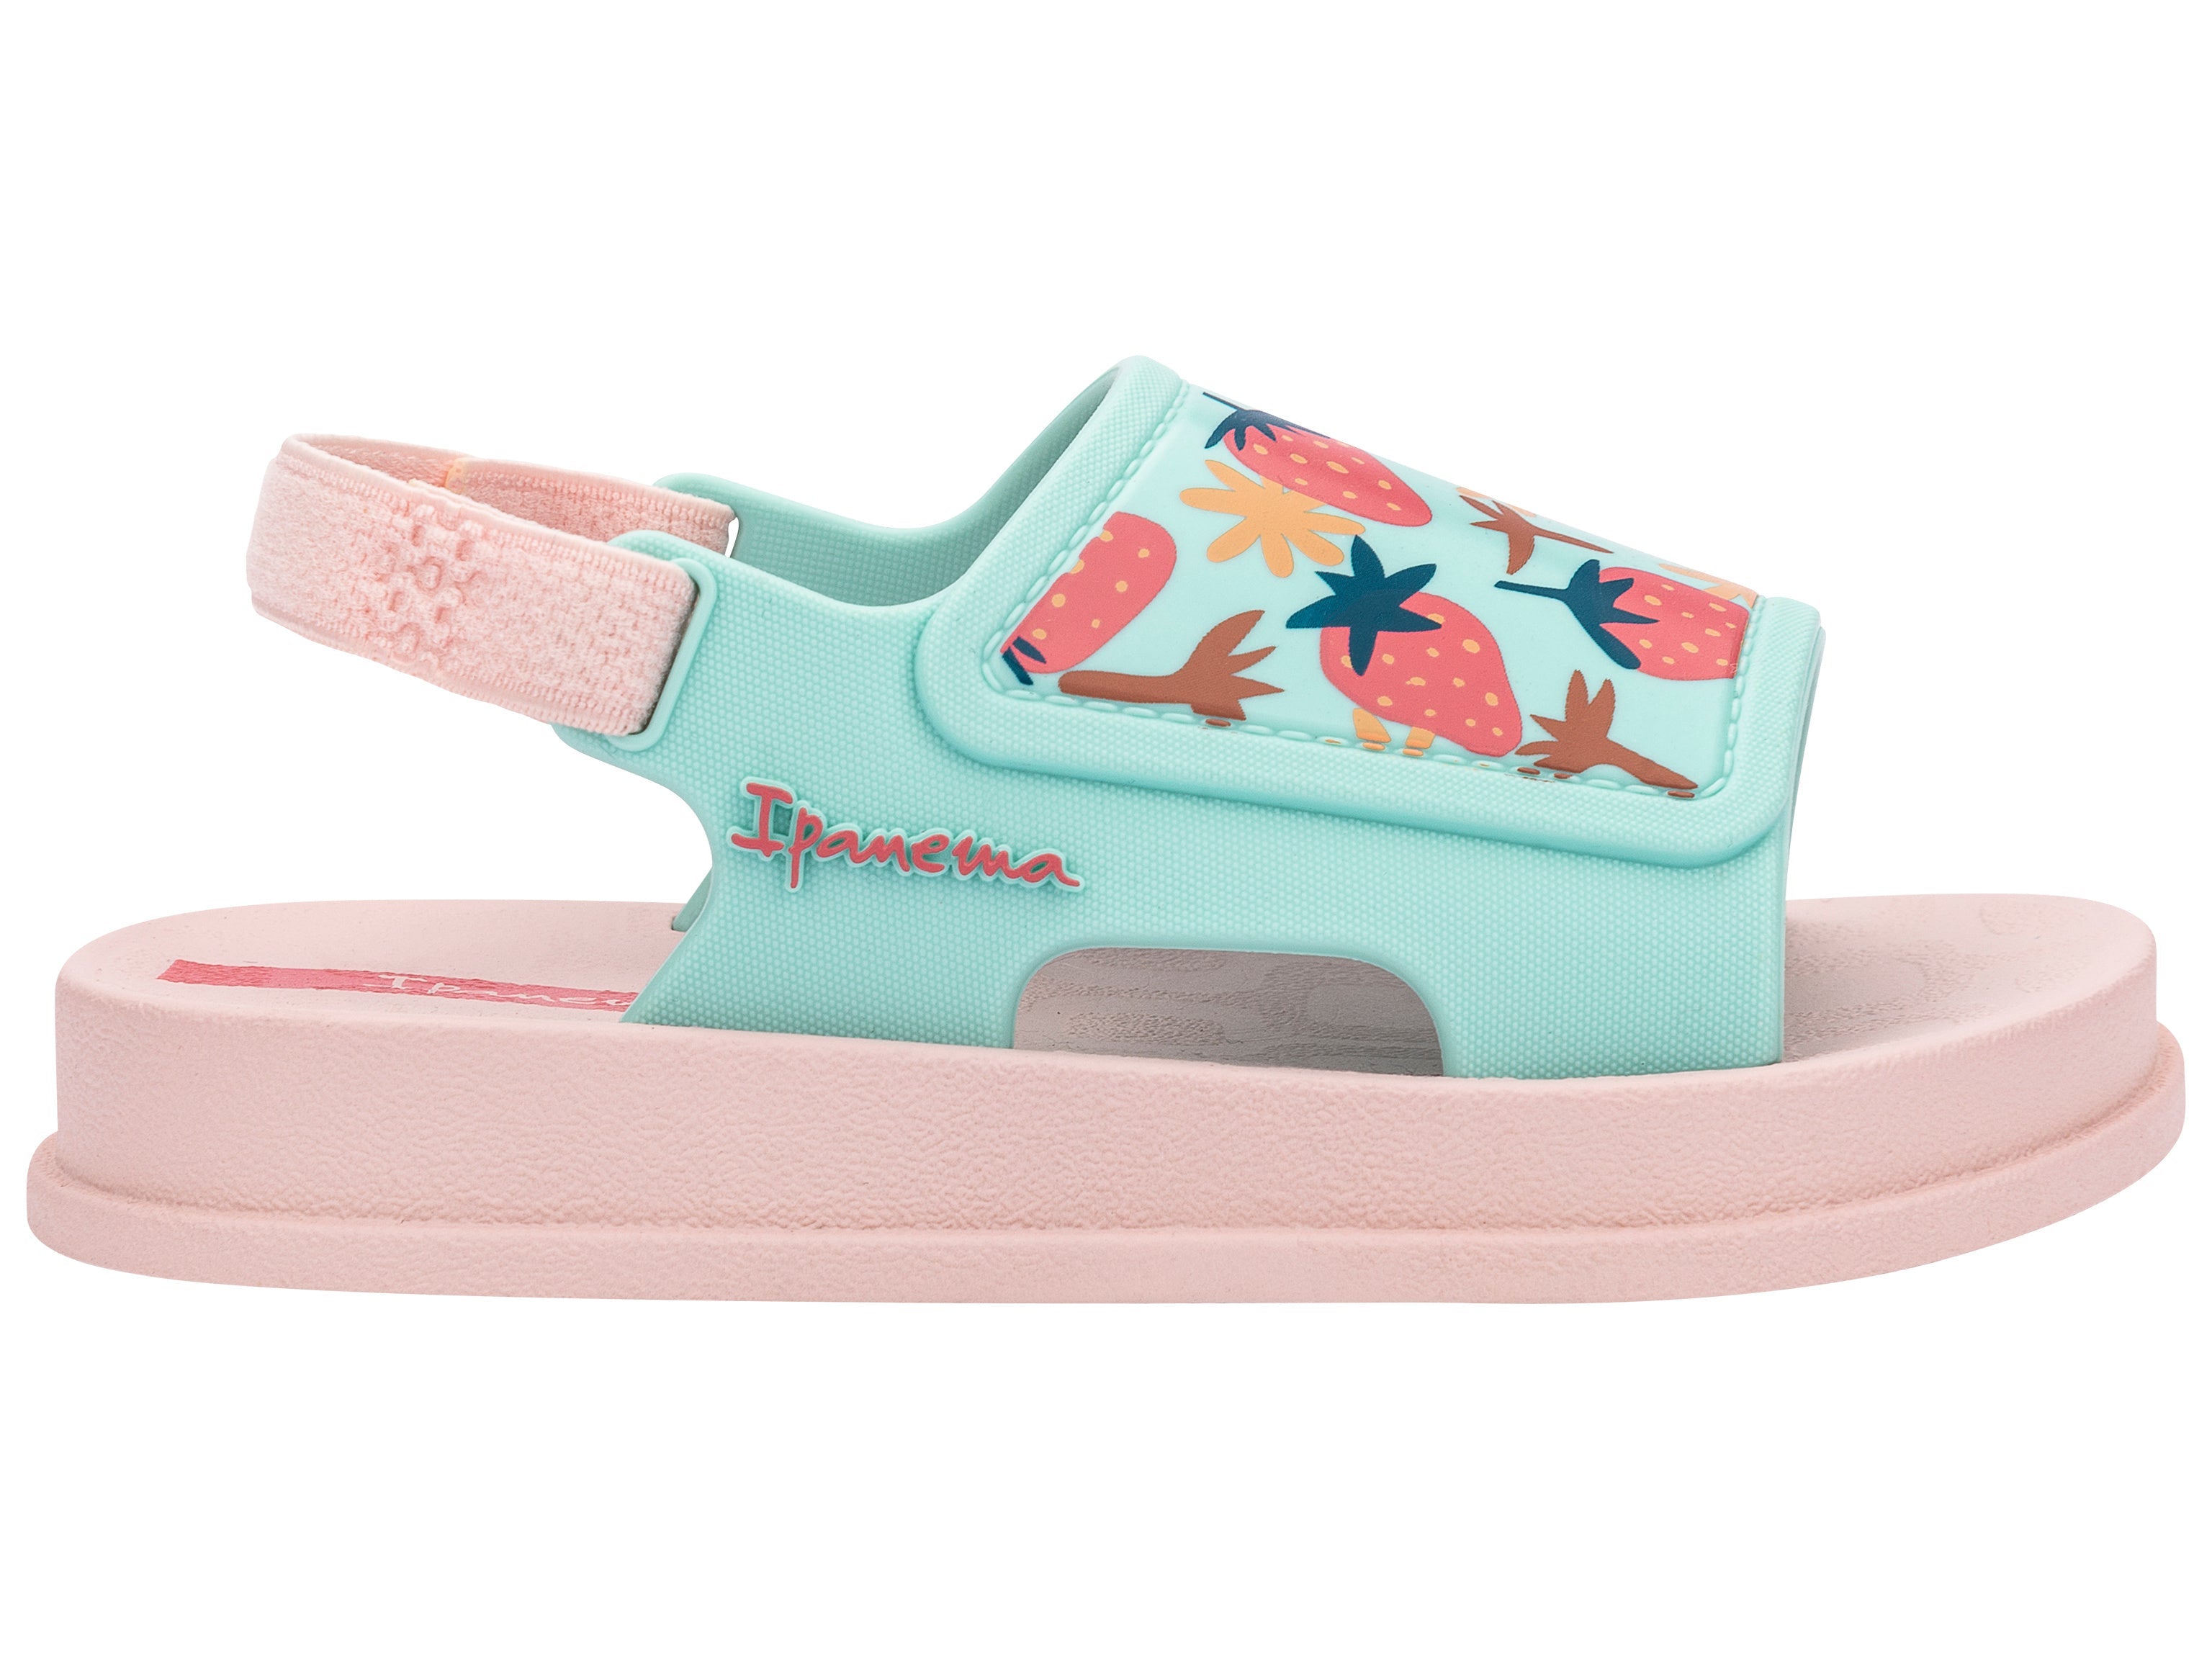 Outer side view of a pink Ipanema Soft baby sandal with fruit print on the green upper.